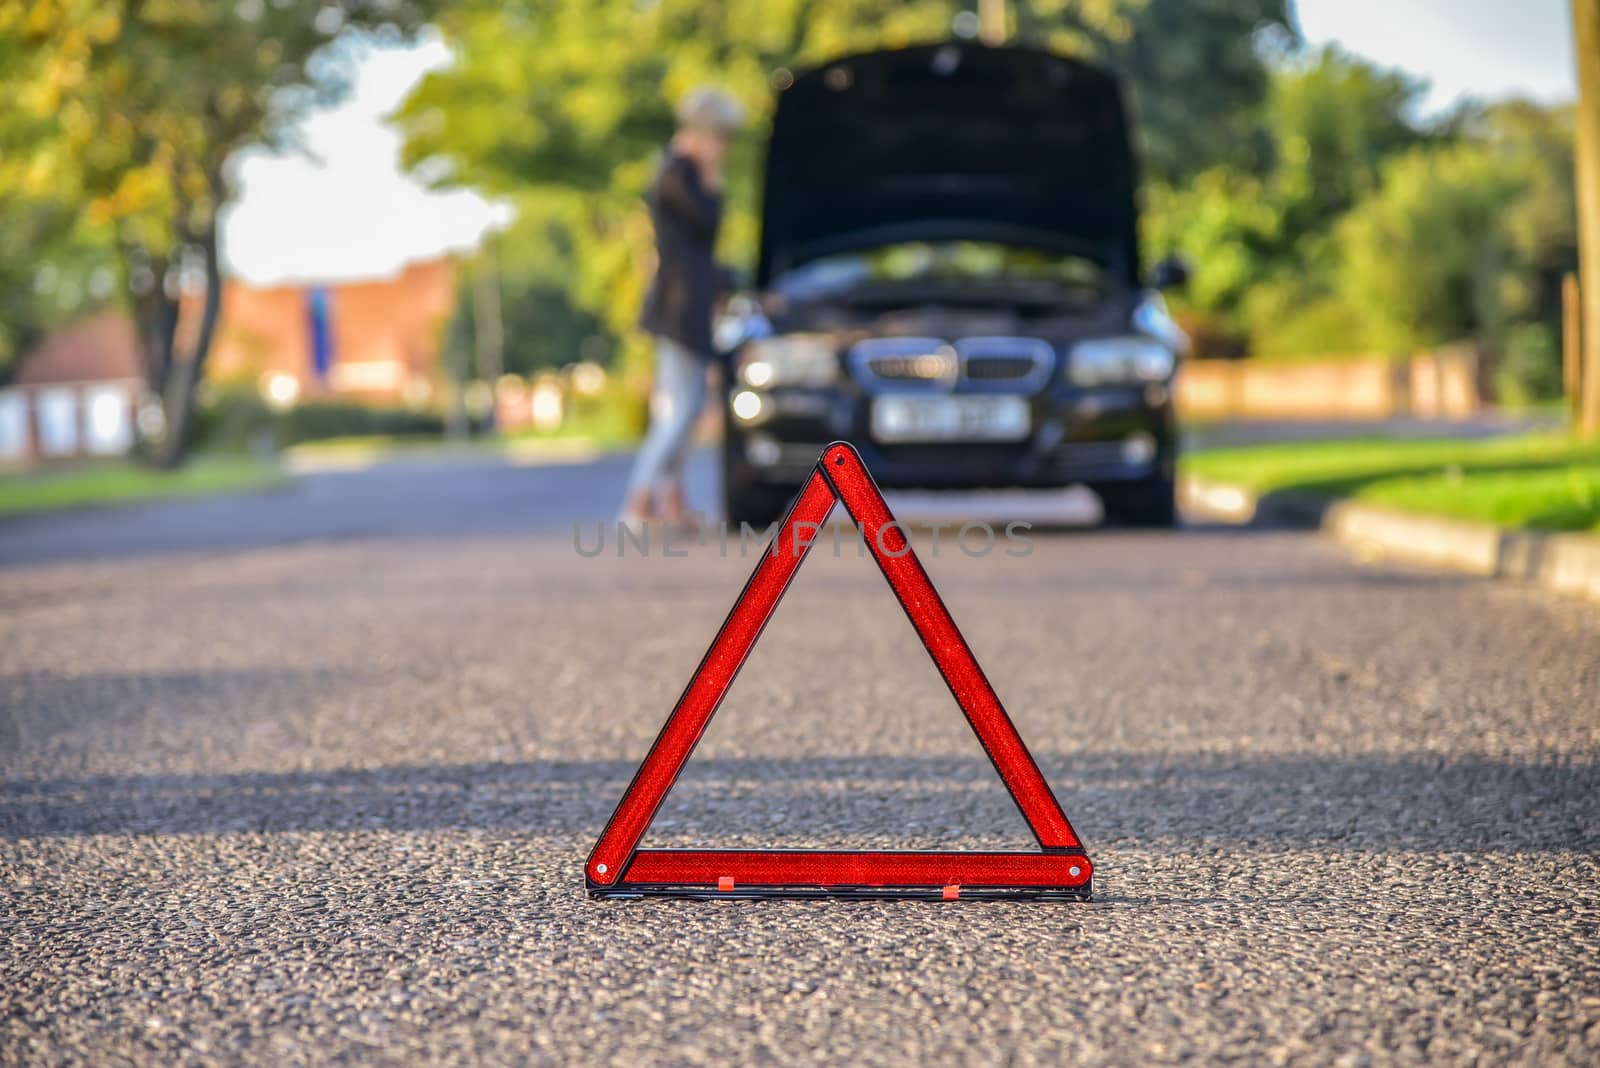 Broken down car with warning triangle,  waiting for assistance to arrive (shallow depth of field, the focus is on the triangle, the car is left out of focus).